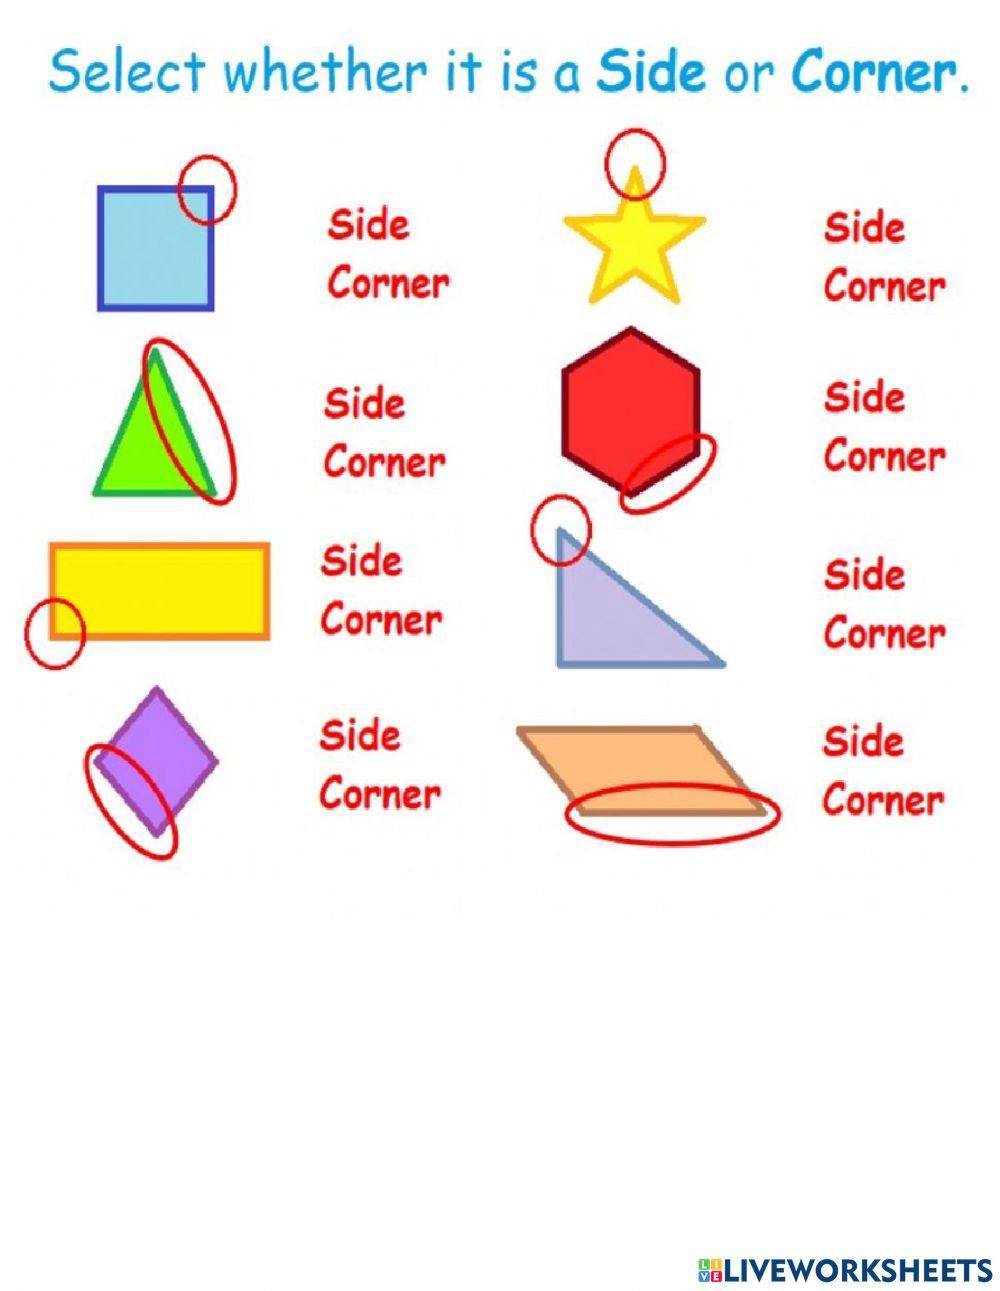 Sides and corners